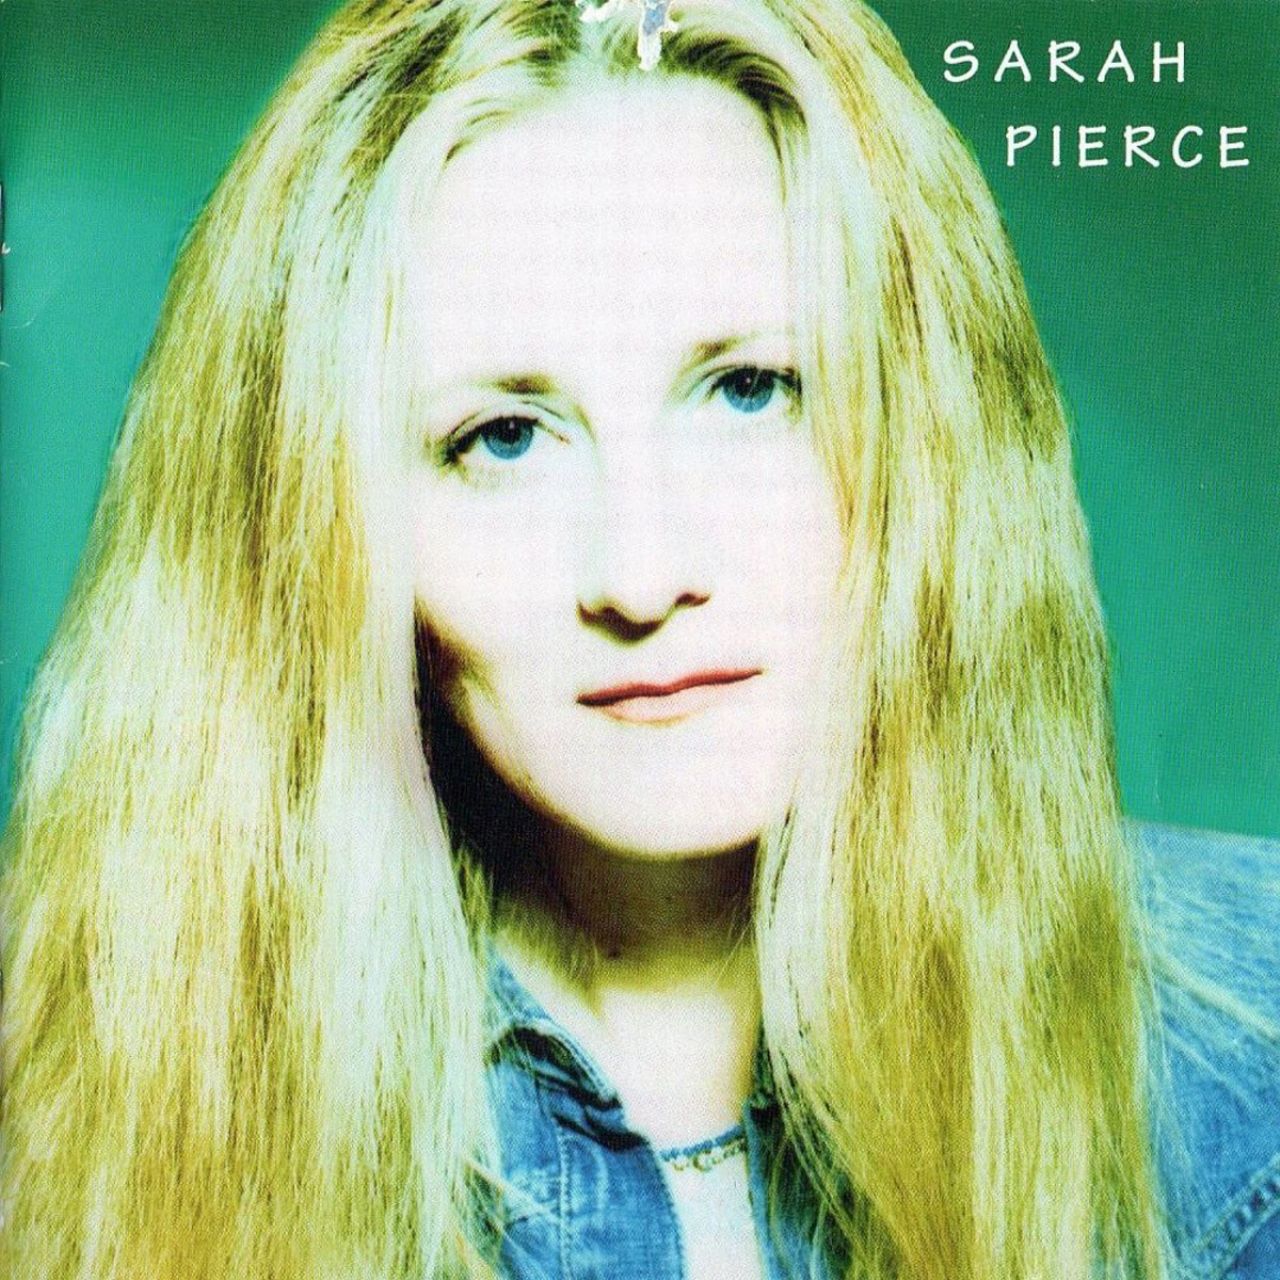 Sarah Pierce - Love's The Only Way cover album